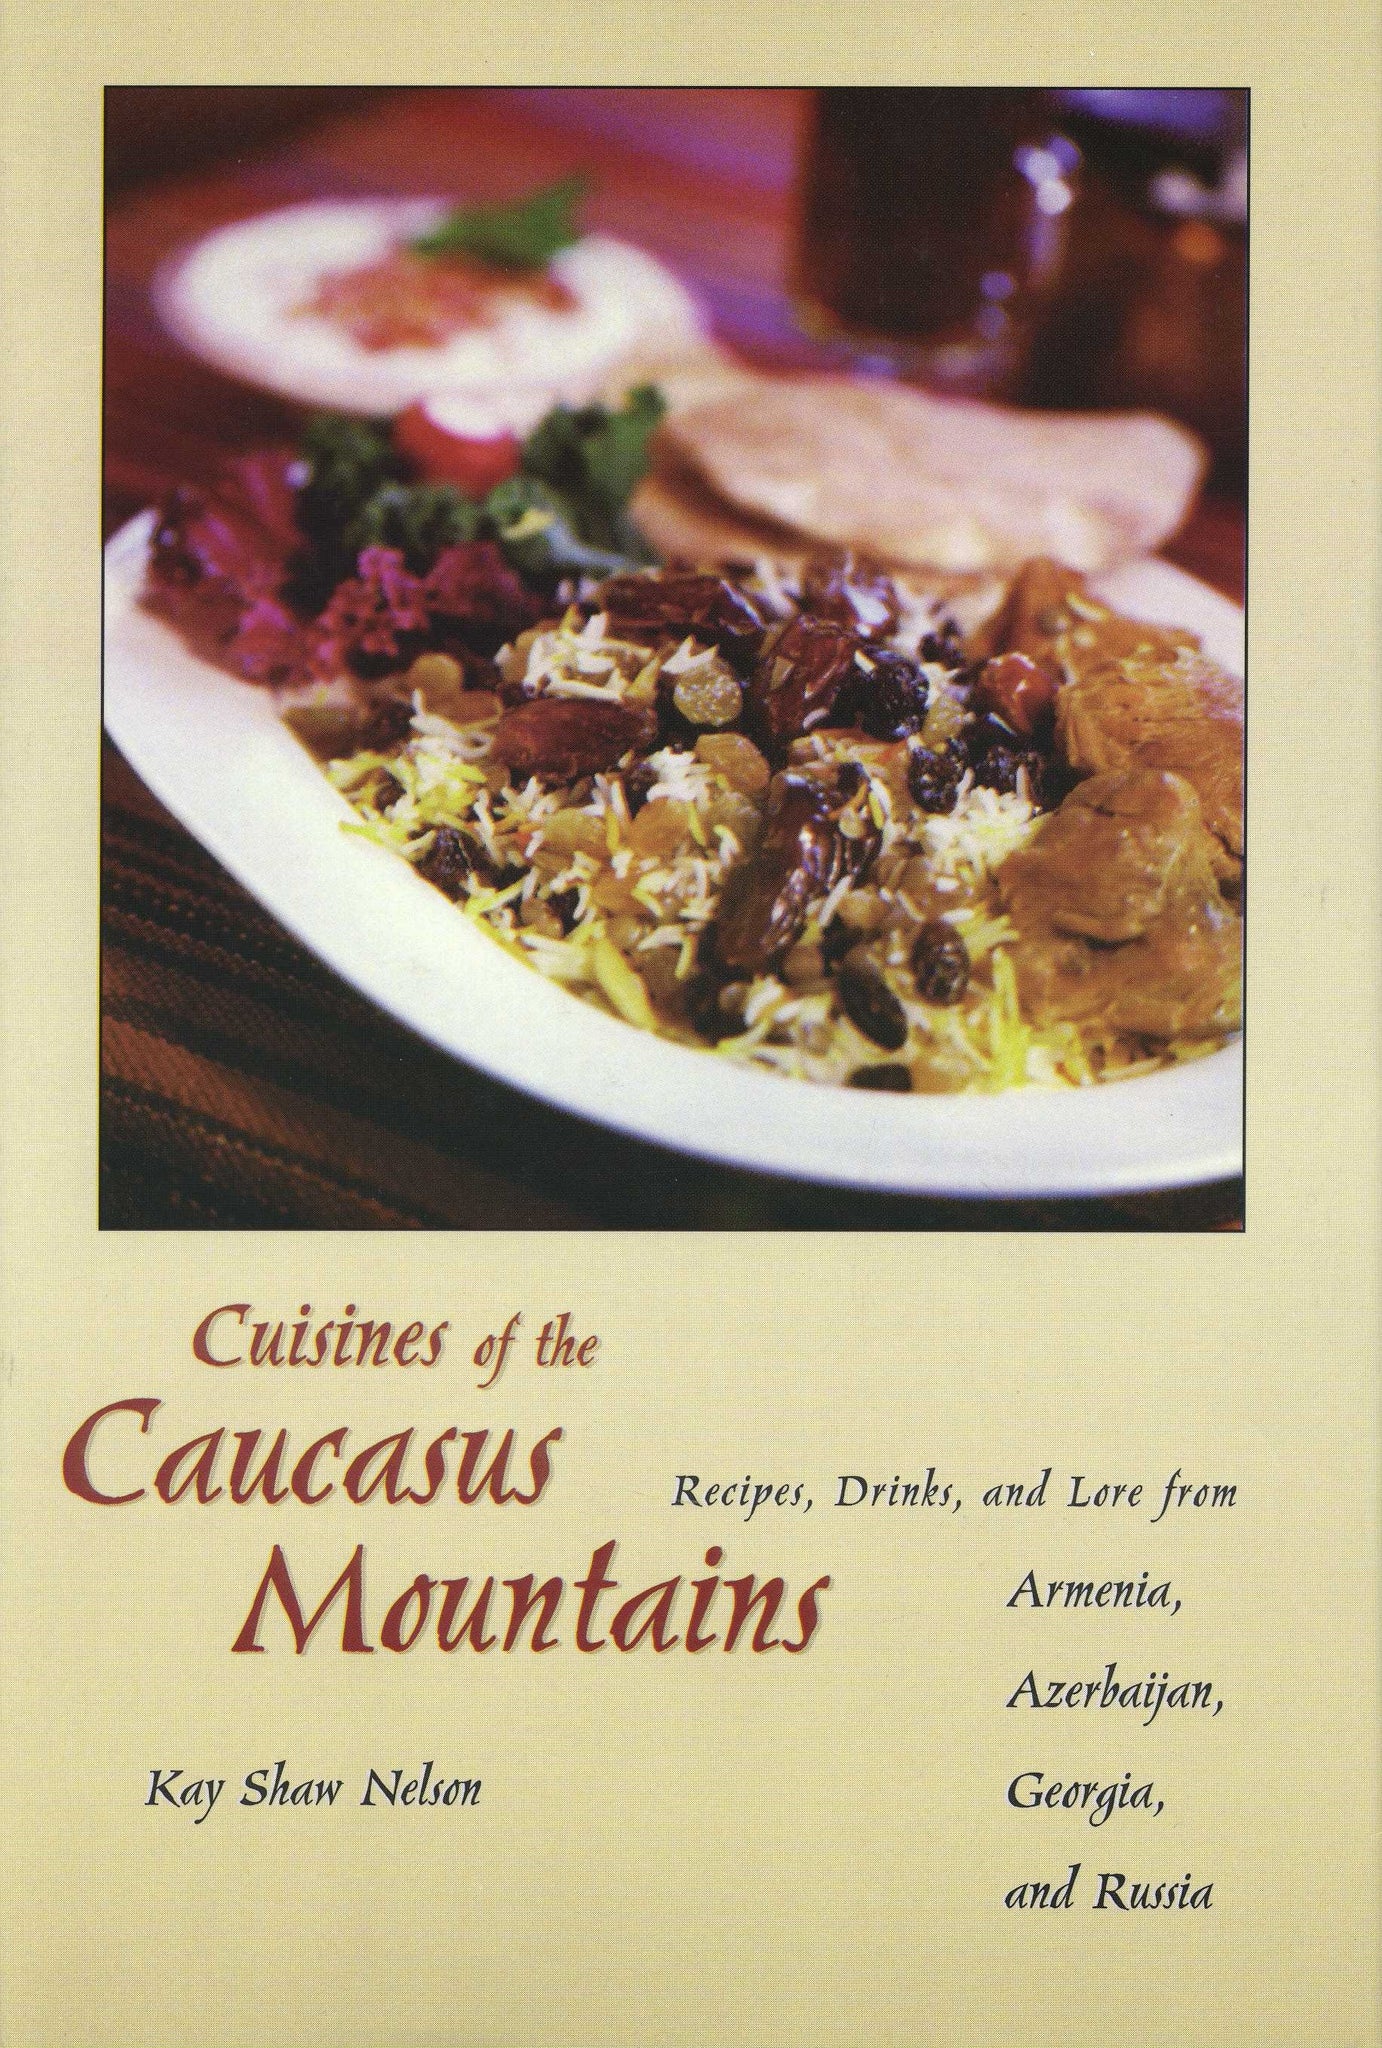 CUISINES OF THE CAUCASUS MOUNTAINS: Recipes, Drinks, and Lore from Armenia, Azerbaijan, Georgia, and Russia